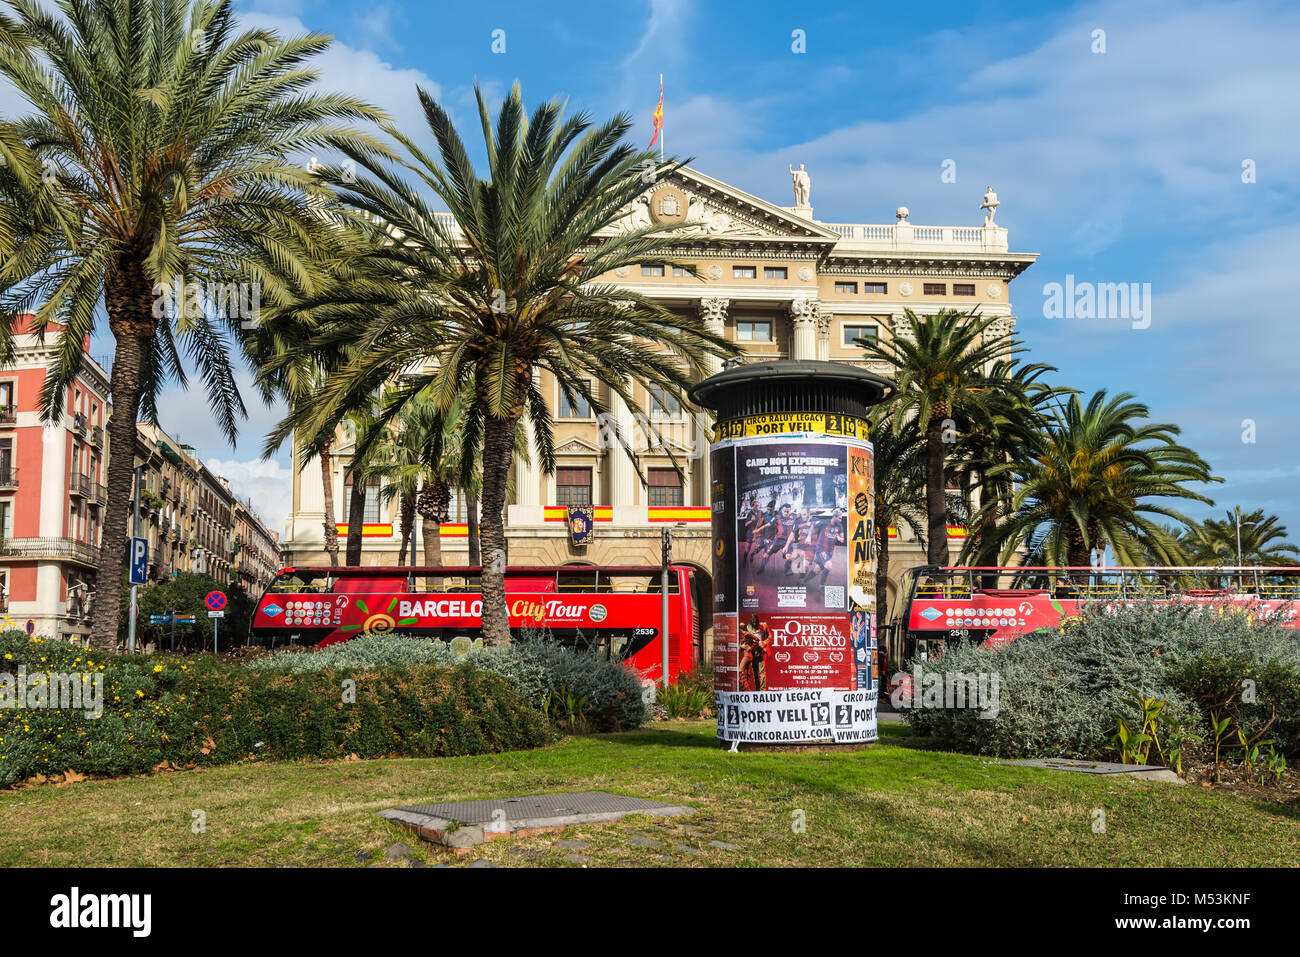 Barcelona, Spain - December 5, 2016: Advertising columns or Morris columns with placards on the street in the Port Vell in Barcelona, Spain. Stock Photo